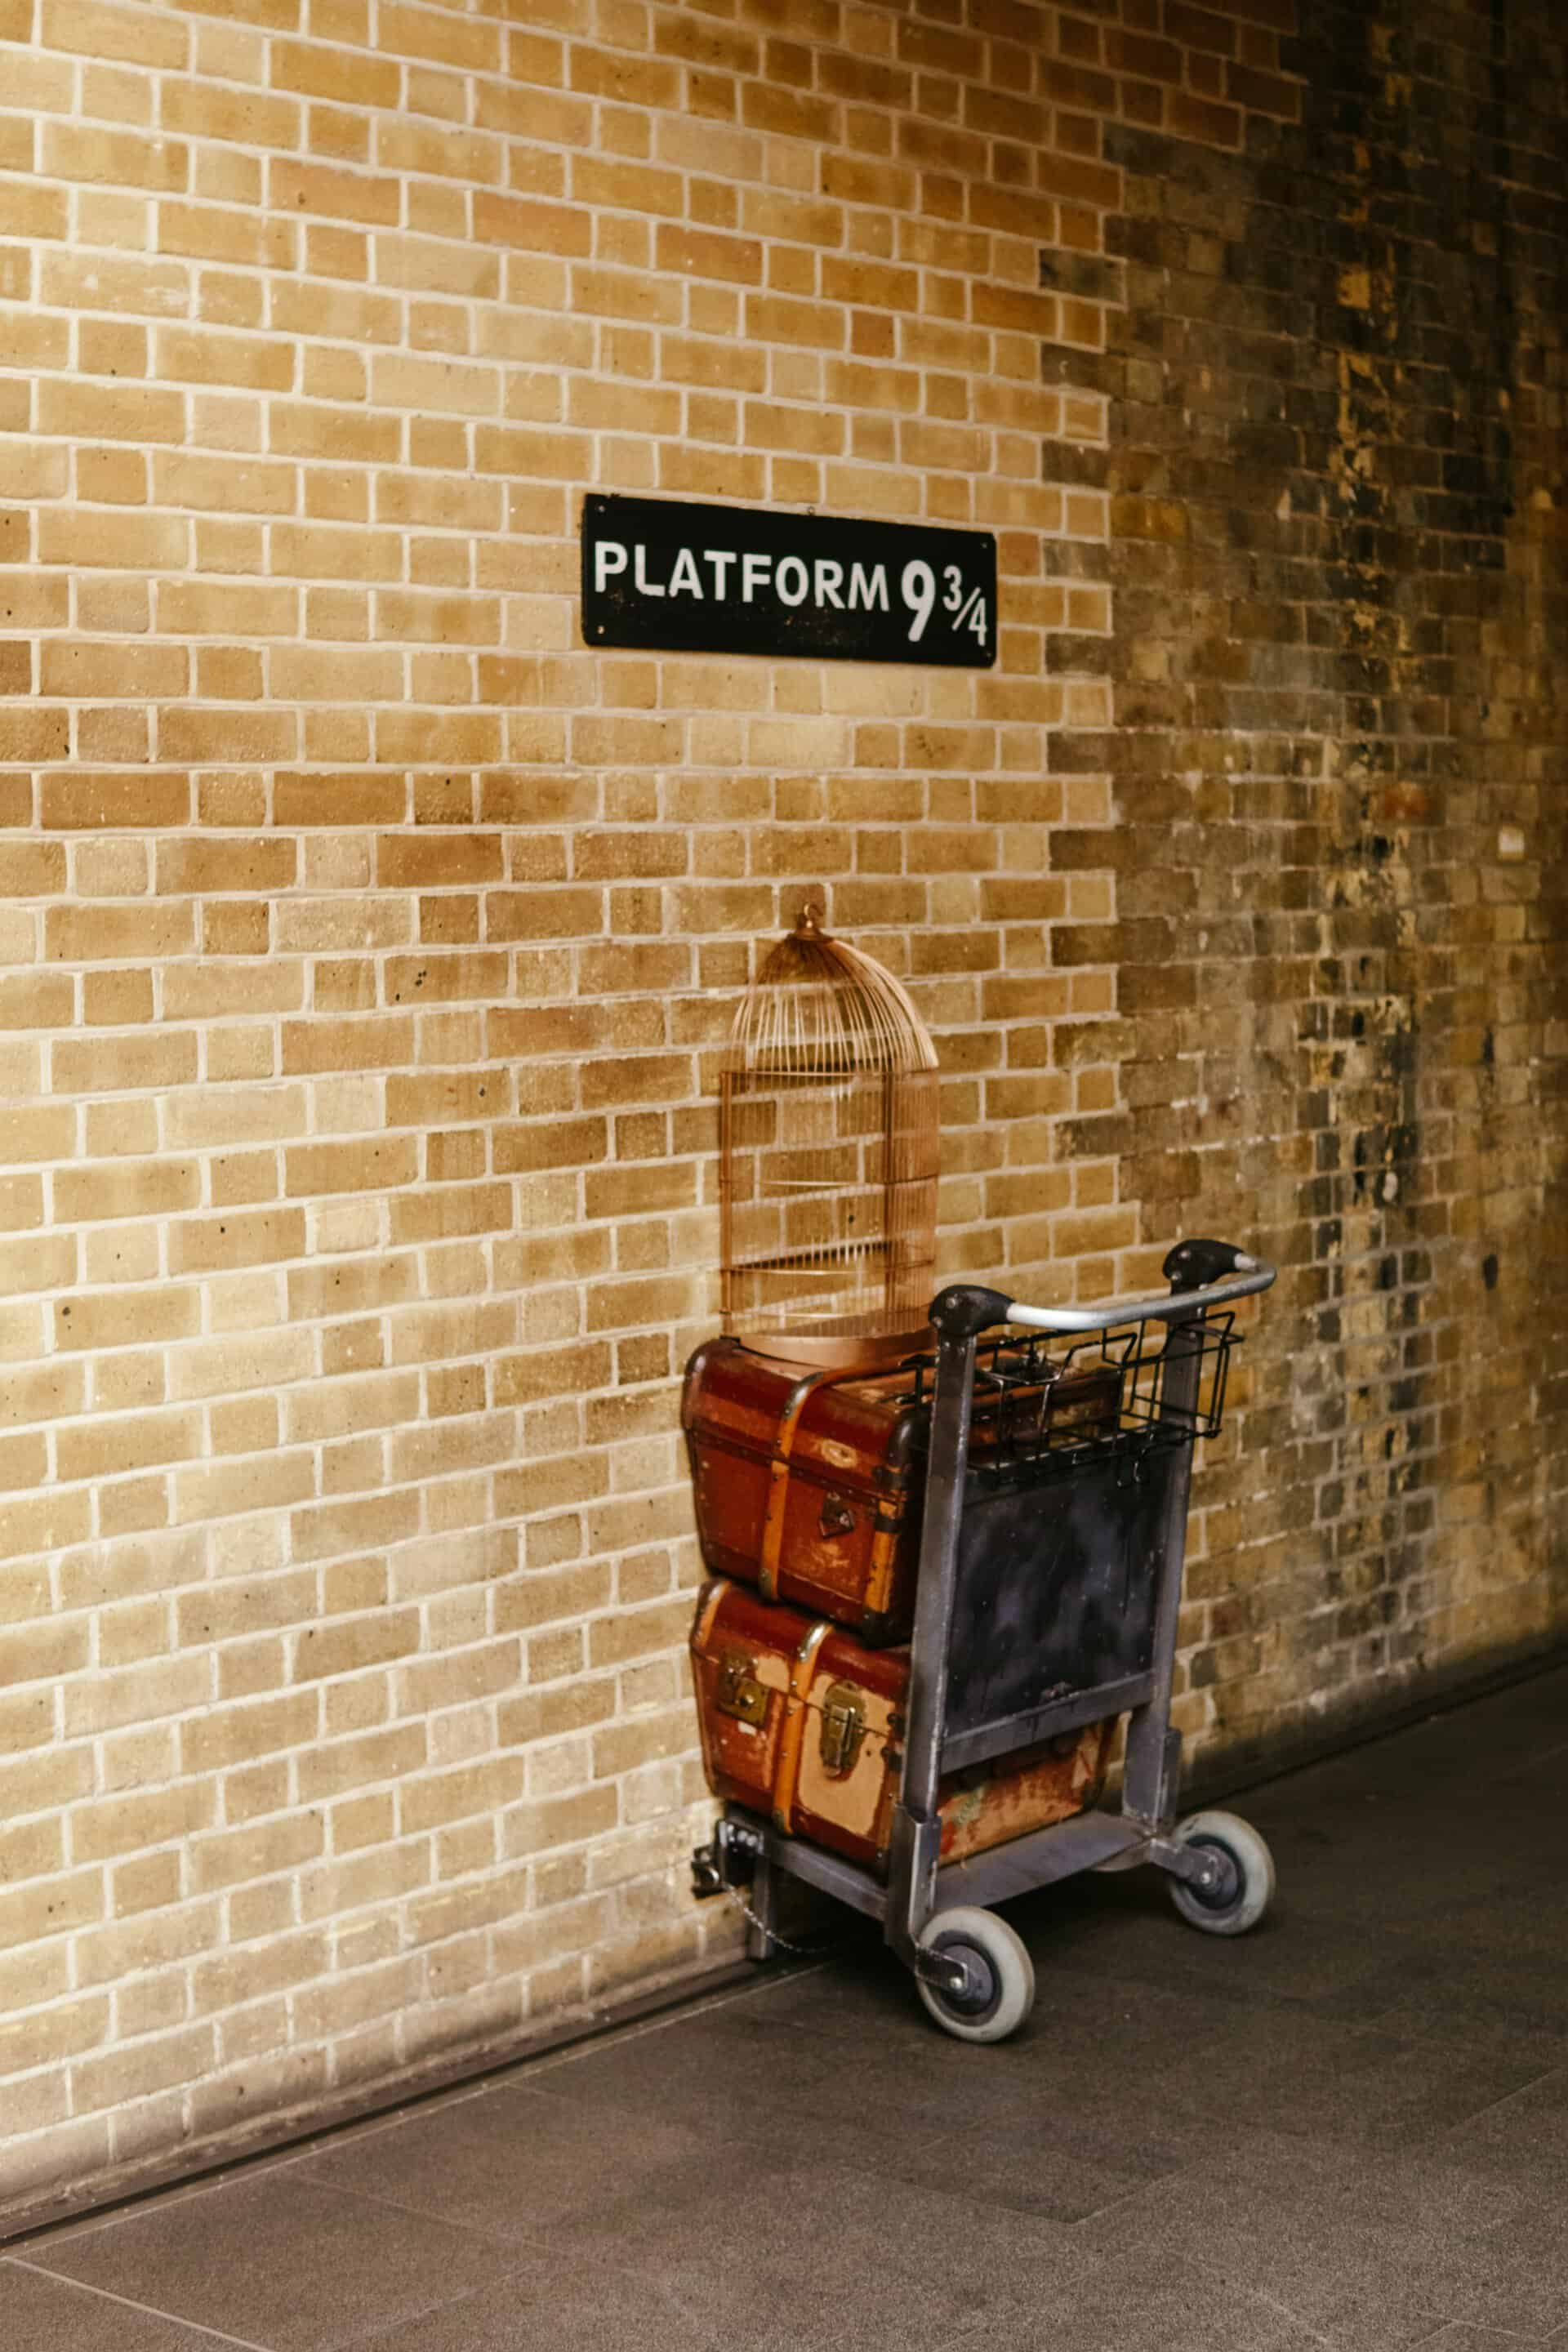 A sign that says "Platform 9 3/4" with a cart going into the wall from the Harry Potter movies at King's Cross station in London, England. 